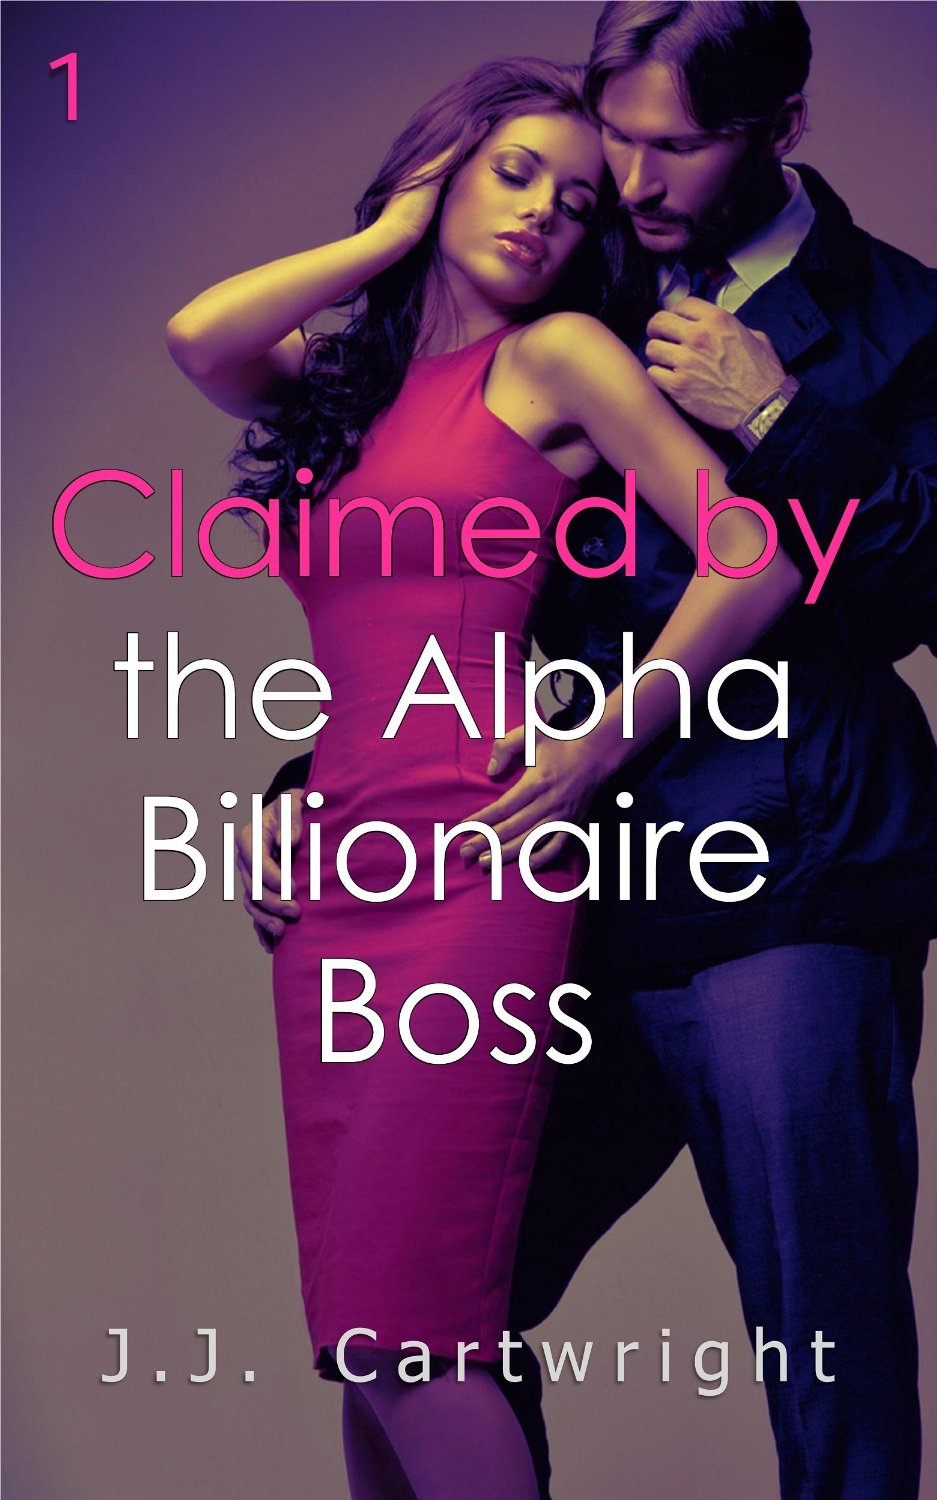 FREE: Claimed by the Alpha Billionaire Boss 1 by J.J. Cartwright